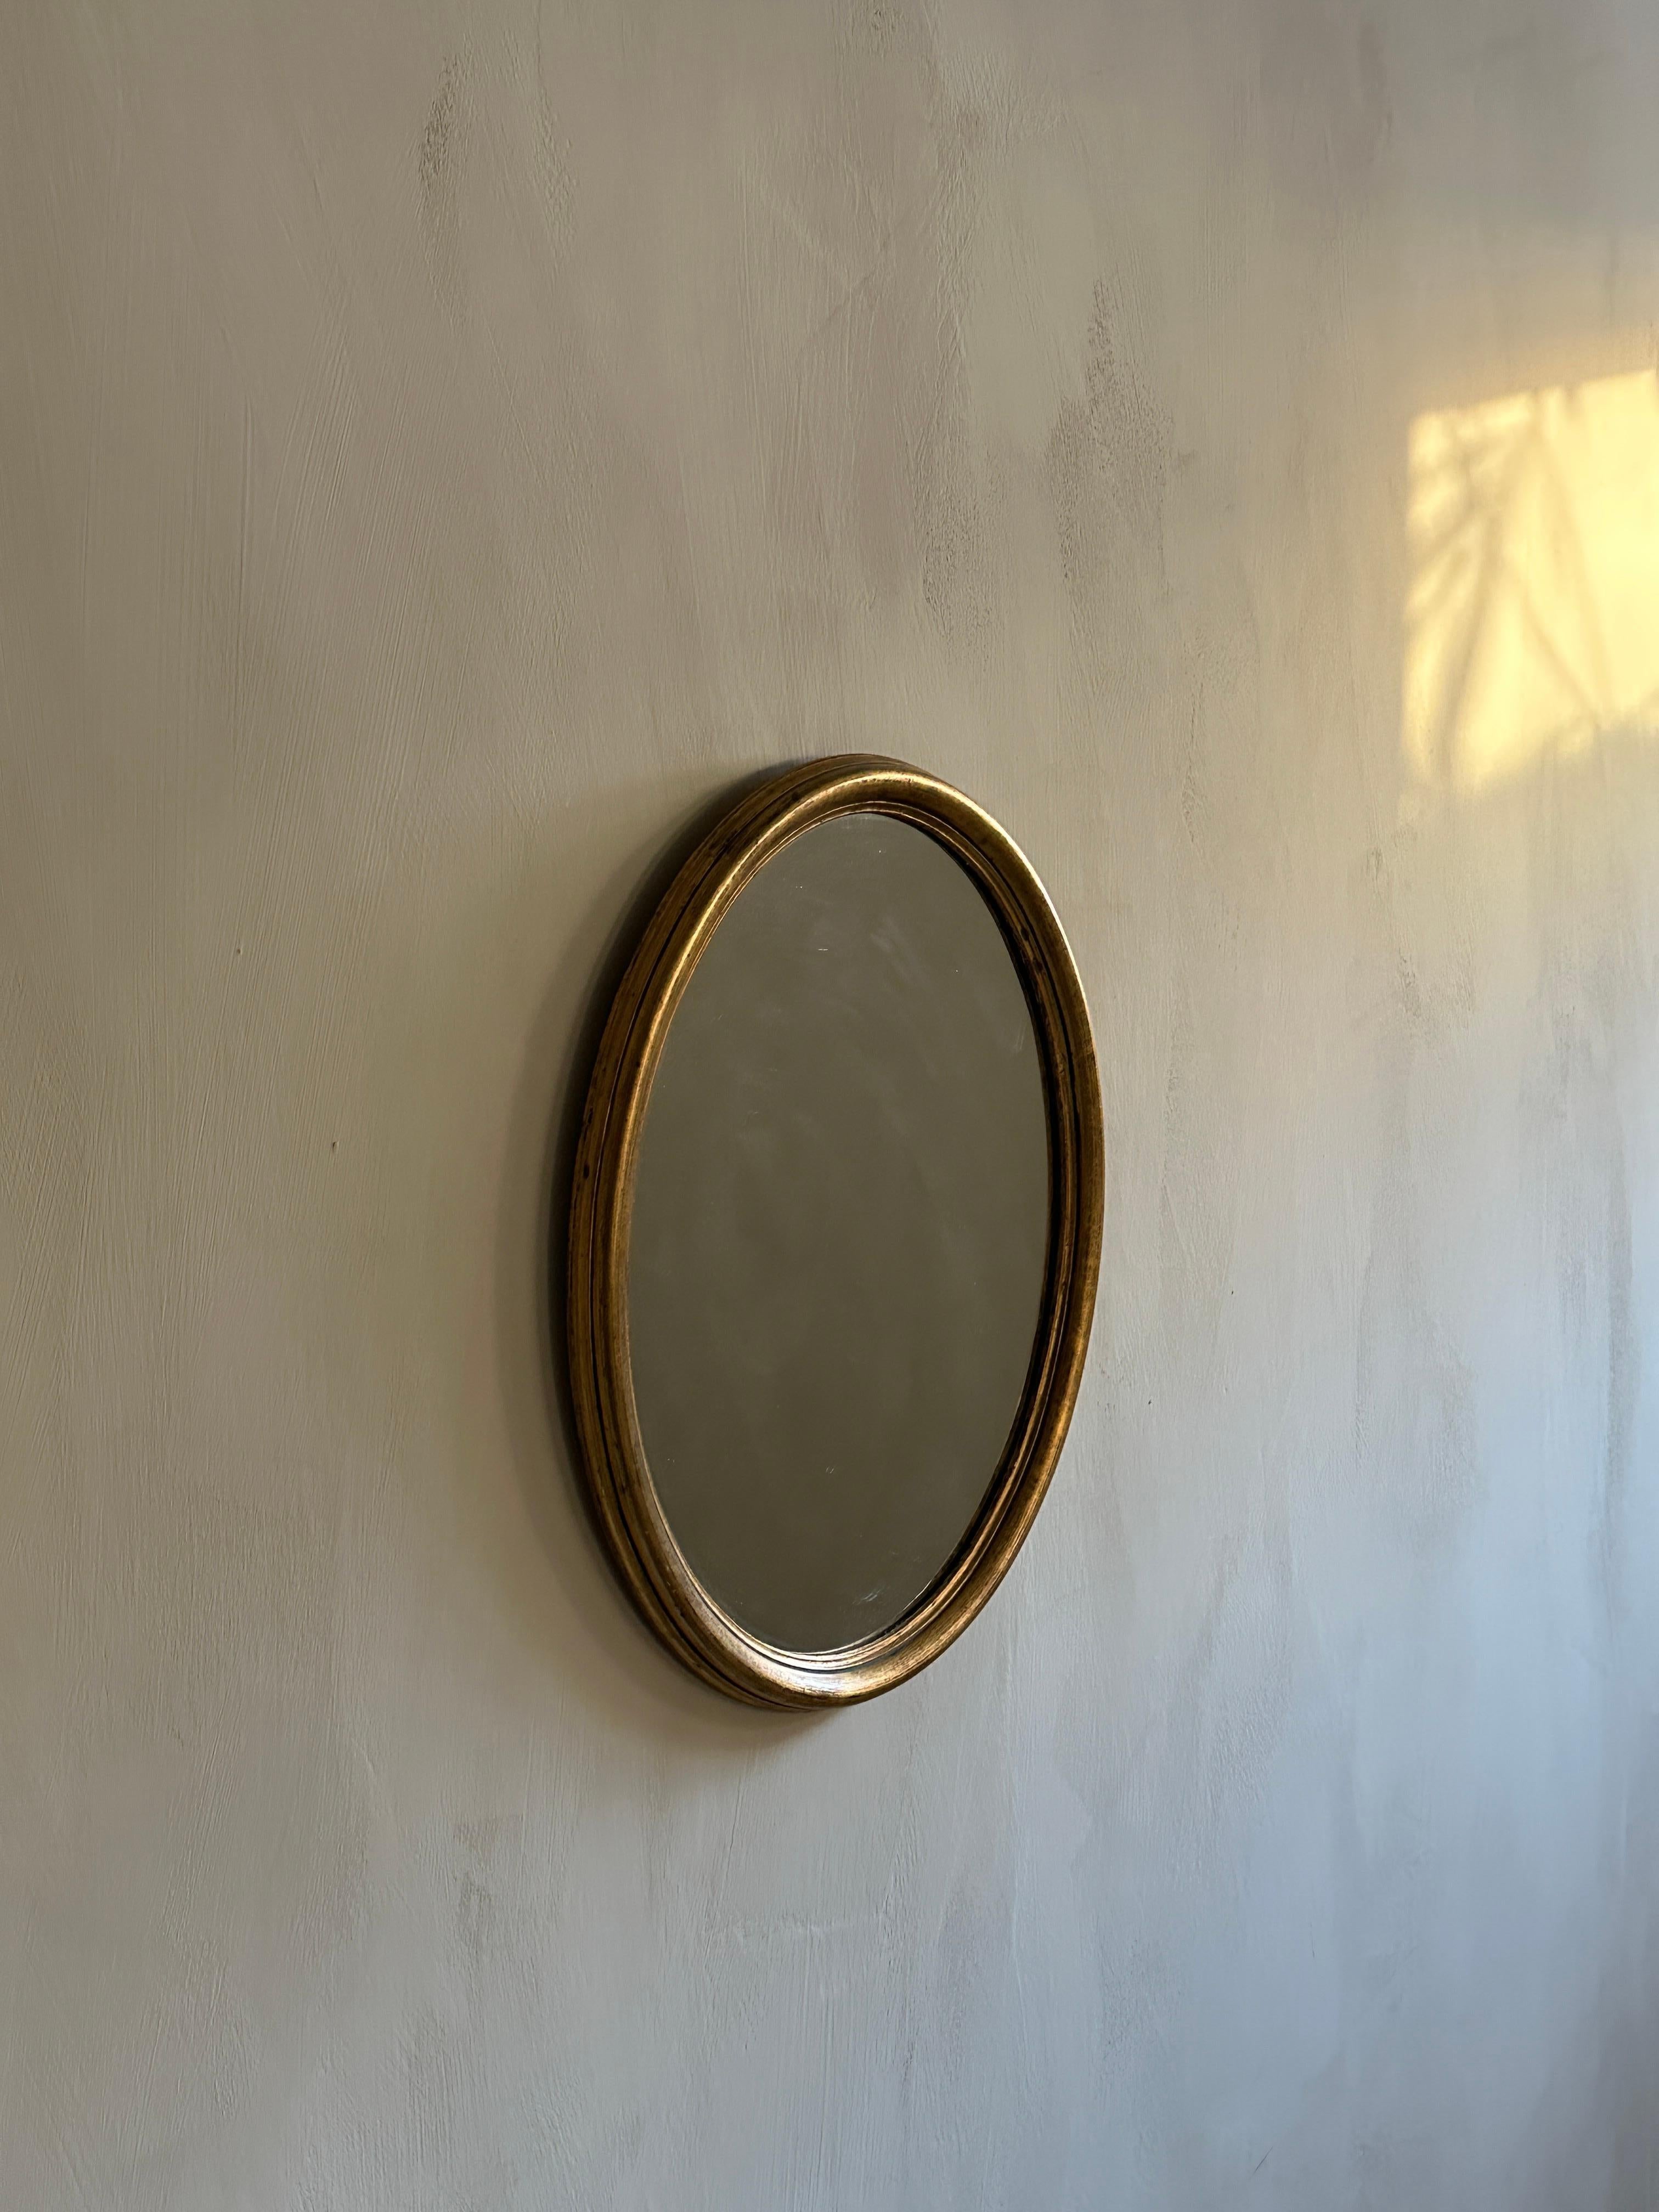 Mid-century Scandinavian wall mirror designed by unknown artist. Original unrestored mirror with golden frame, circa 1930/40s. Very elegant and characteristic egg shape. 

Wear due to age and use with some patina on the glass. Stains.